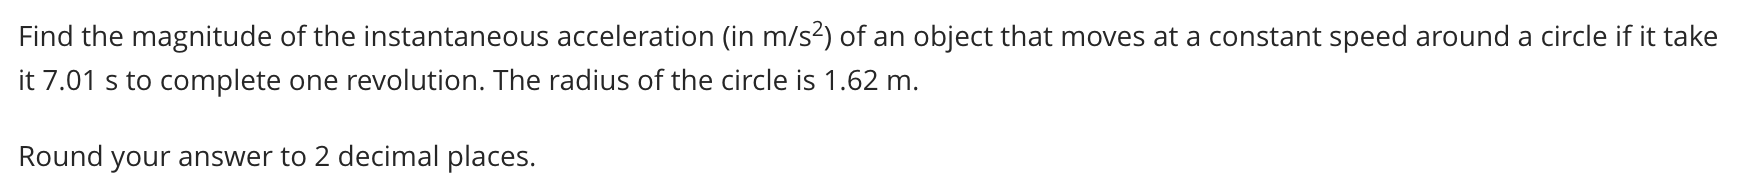 Find the magnitude of the instantaneous acceleration (in m/s?) of an object that moves at a constant speed around a circle if it take
it 7.01 s to complete one revolution. The radius of the circle is 1.62 m.
